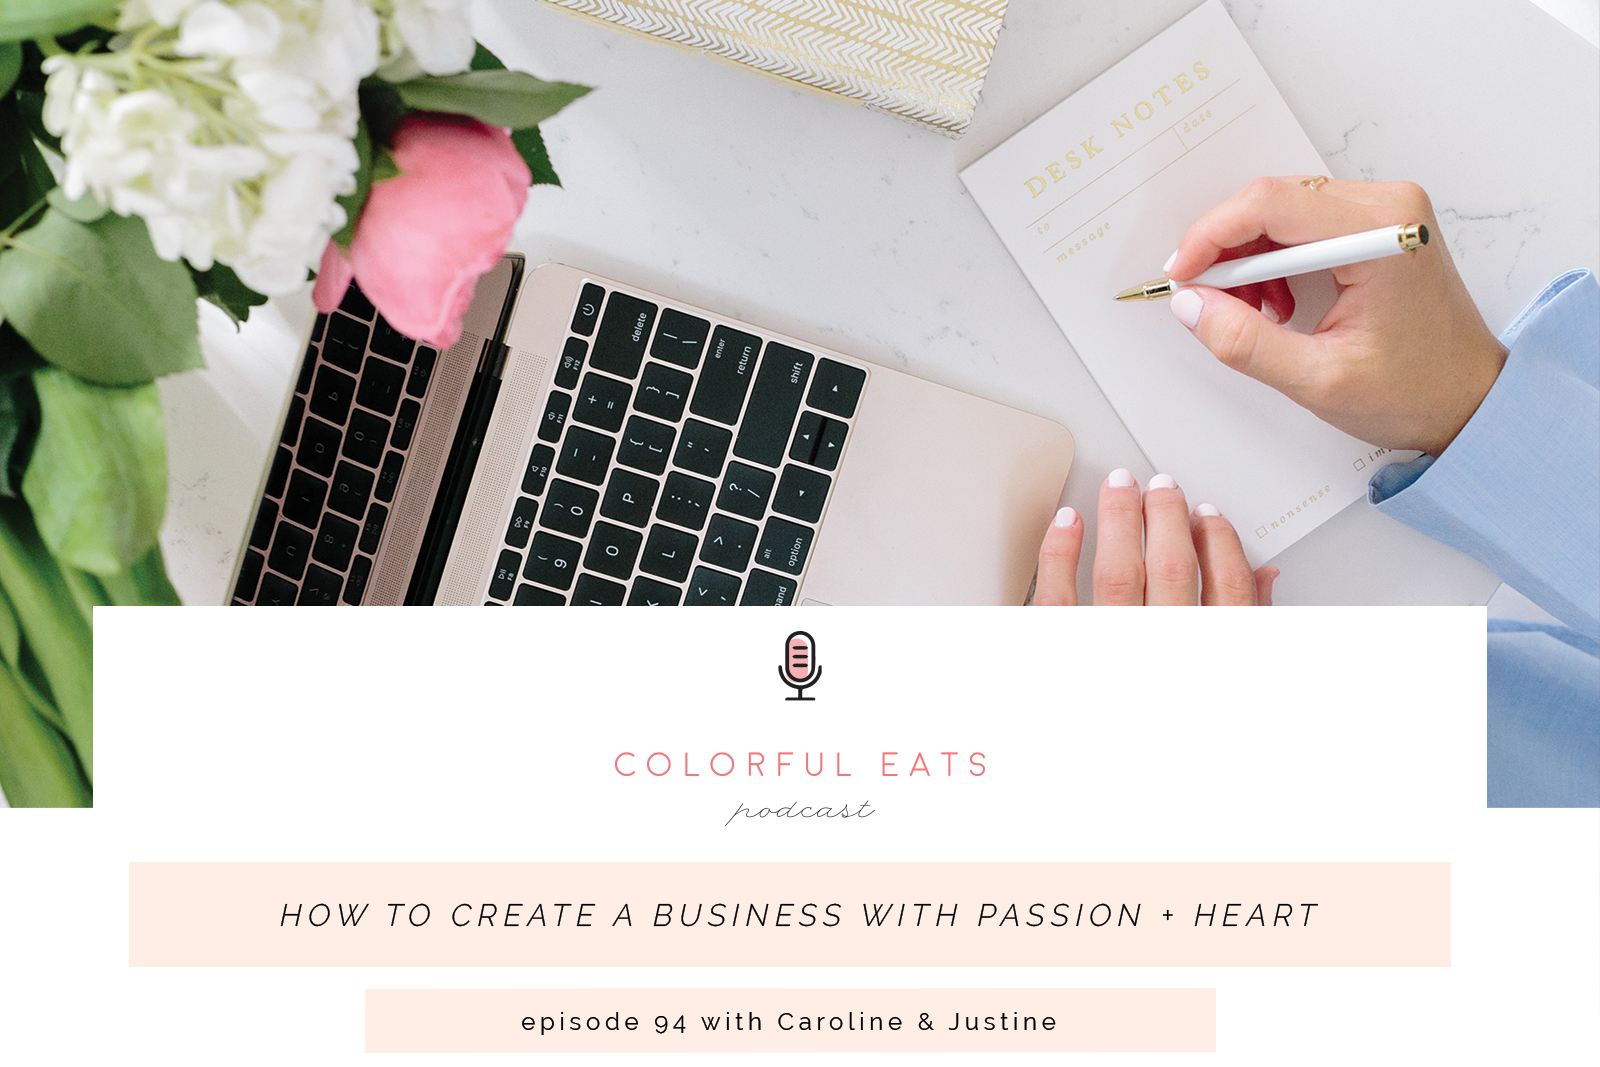 Episode 94: How to Create a Business with Passion + Heart